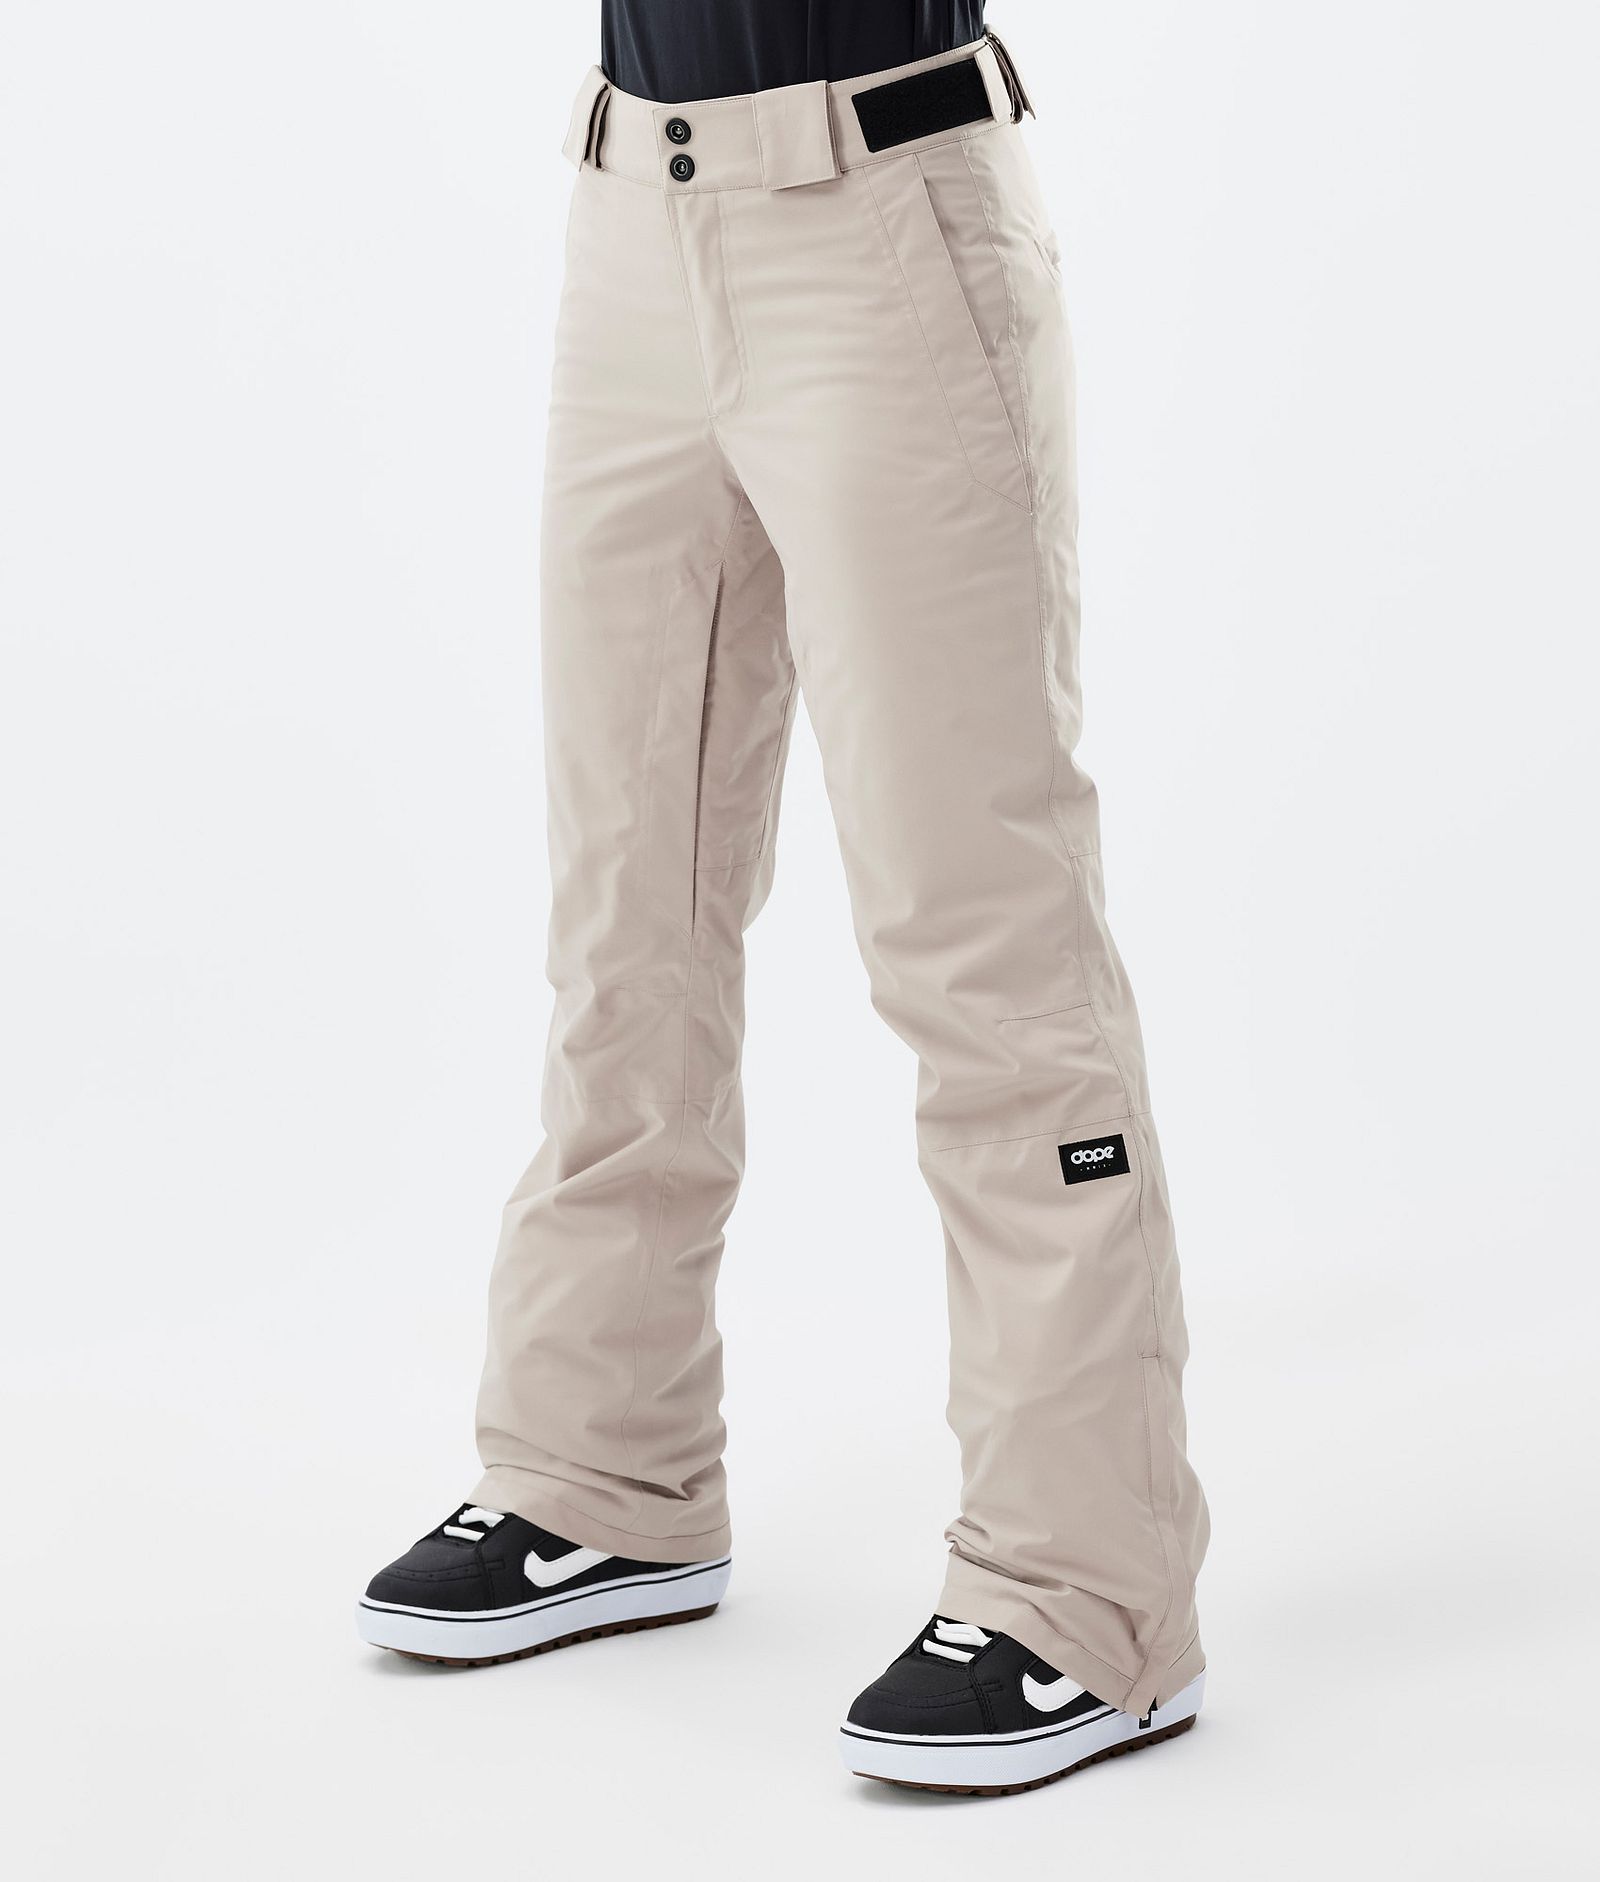 Dope Con W Snowboard Pants Women Sand, Image 1 of 6